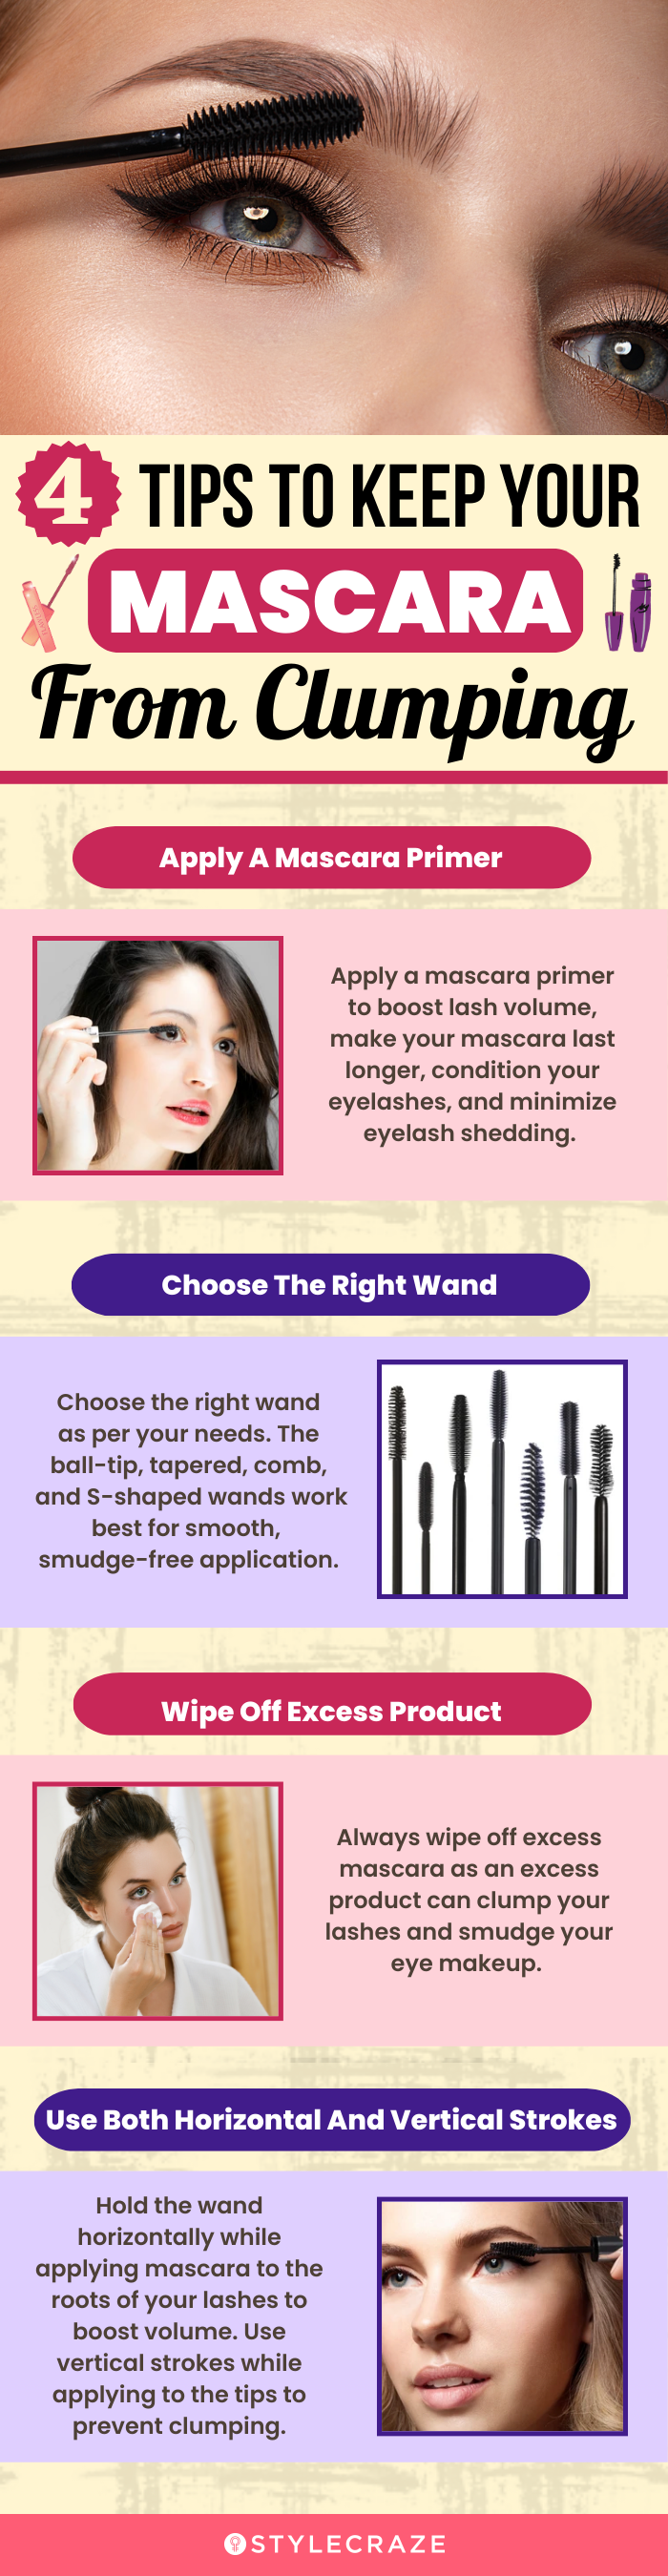 5 Points To Remember While Buying Your Mascara Primer (infographic)